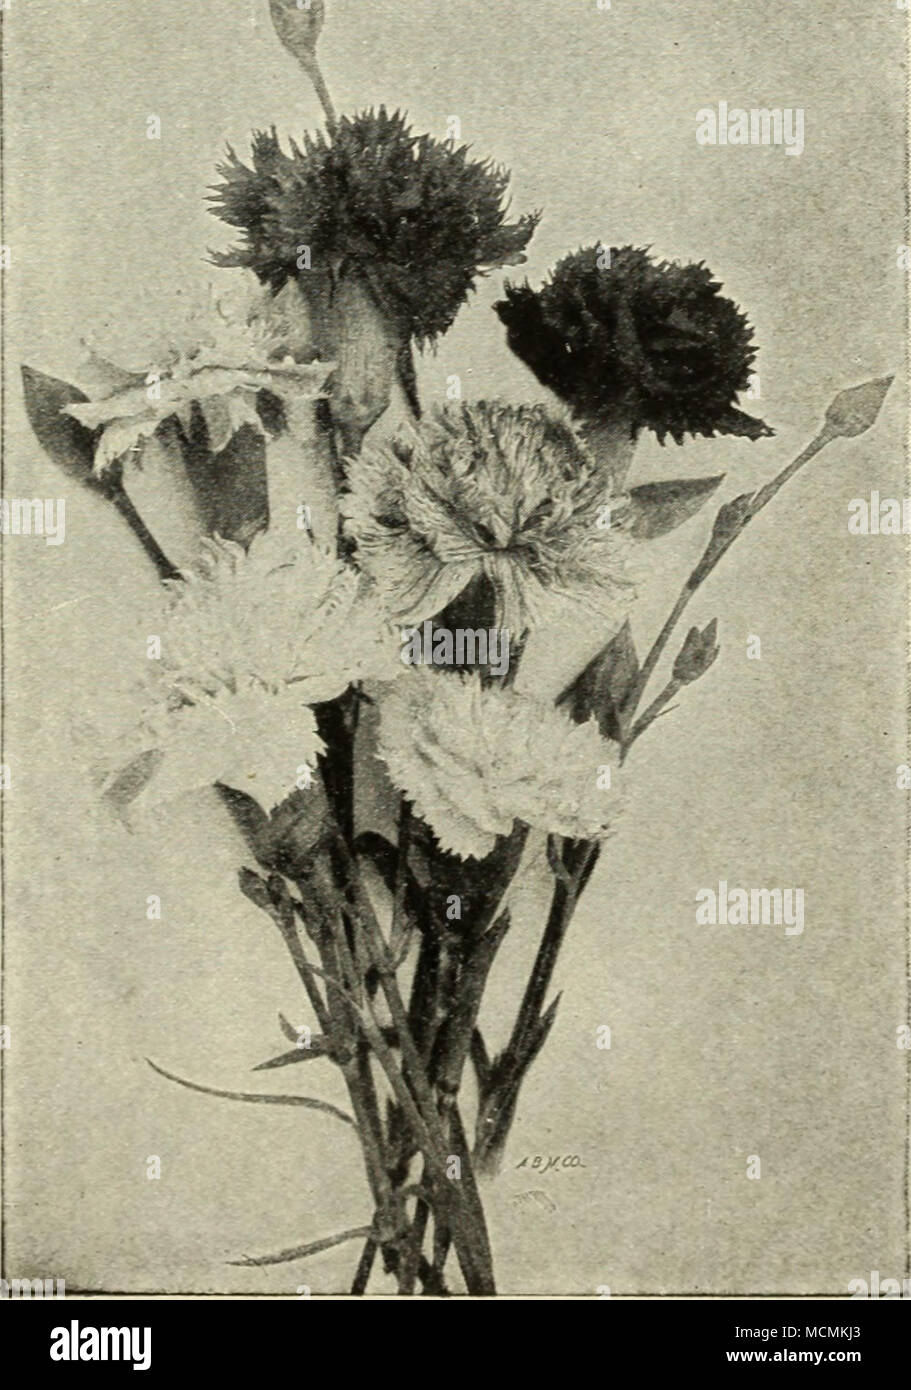 . DIANTHUS (Hardy Garden Pinks)—Double white and crimson. 12 to 18 inches. GAILLARDIA (Blanket Flower) Grand Maxima—Conspicuous for profusion and duration of bloom. 2 feet. ACHILLEA (The Pearl)—Pure white double flowers in dense clusters; fine for cut- ting purposes and cemetery use. 2 feet. Blooms from June to October. GYPSOPHILA ACUTIFOLIA (Baby's Breath)—Leaves narrow. Flowers rose- colored. 2 to 3 feet, Paniculata—Rough narrow leaves. Small white flowers. 2 to 3 feet. HOLLYHOCKS (Everblooming)—Double or single, mixed. 6 to 7 feet. Blooming in July SHASTA DAISY—Pure glistening white with sm Stock Photo